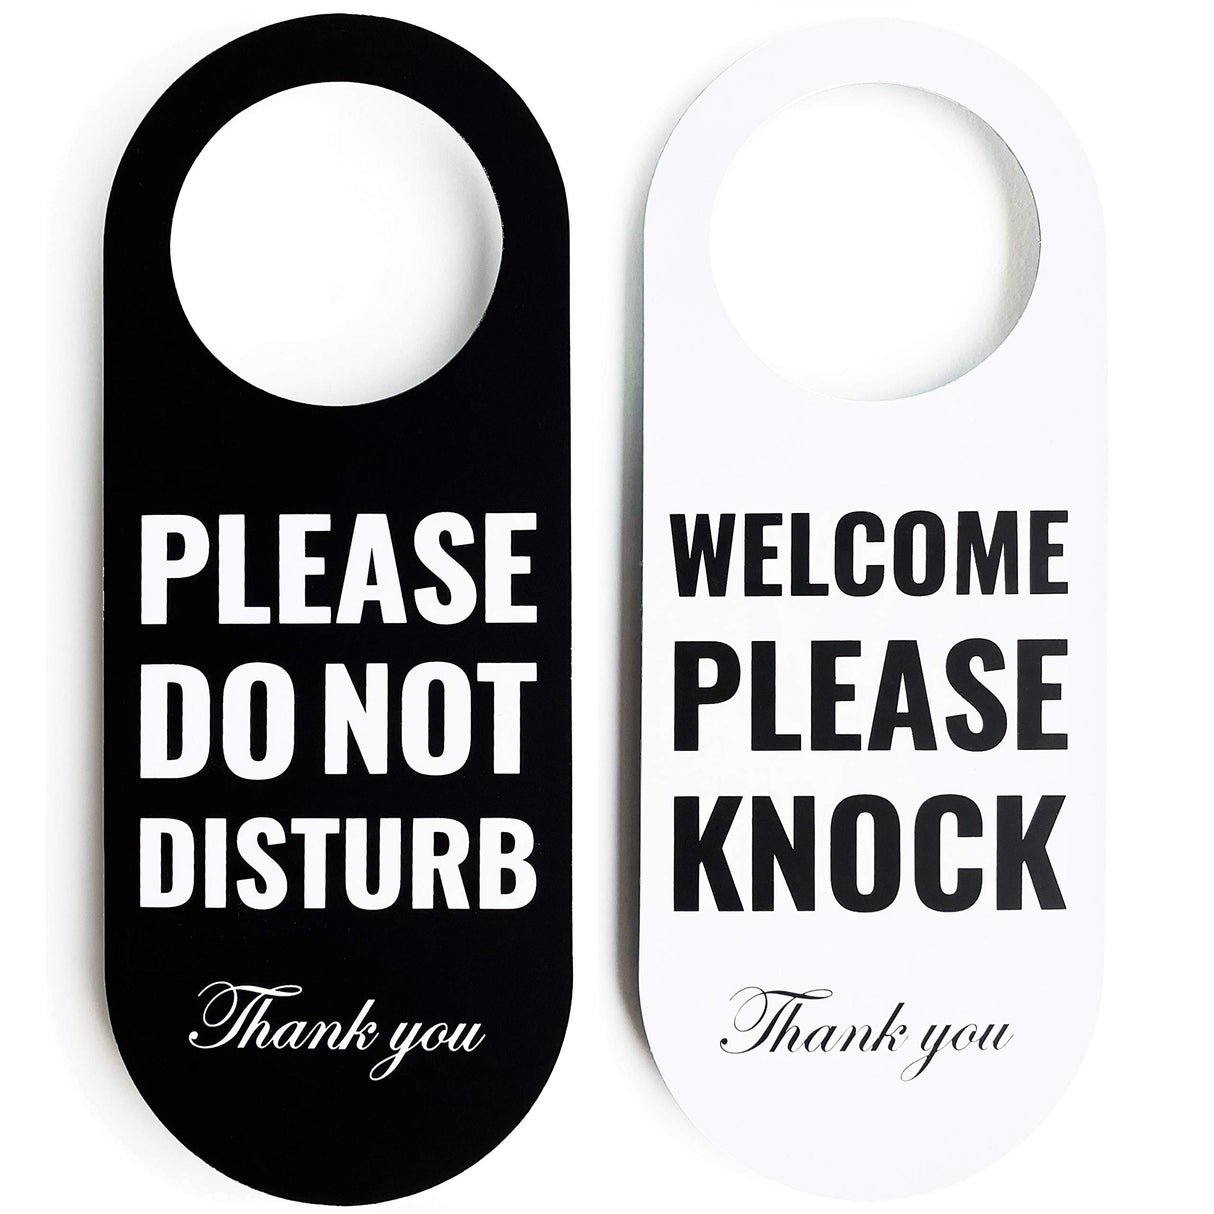 Do Not Disturb Door Hanger Sign 2 Pack (Black/White Double Sided) Please Do Not Disturb on Front and Welcome Please Knock on Back Side, for Office Home Clinic Dorm Online Class and Meeting Session